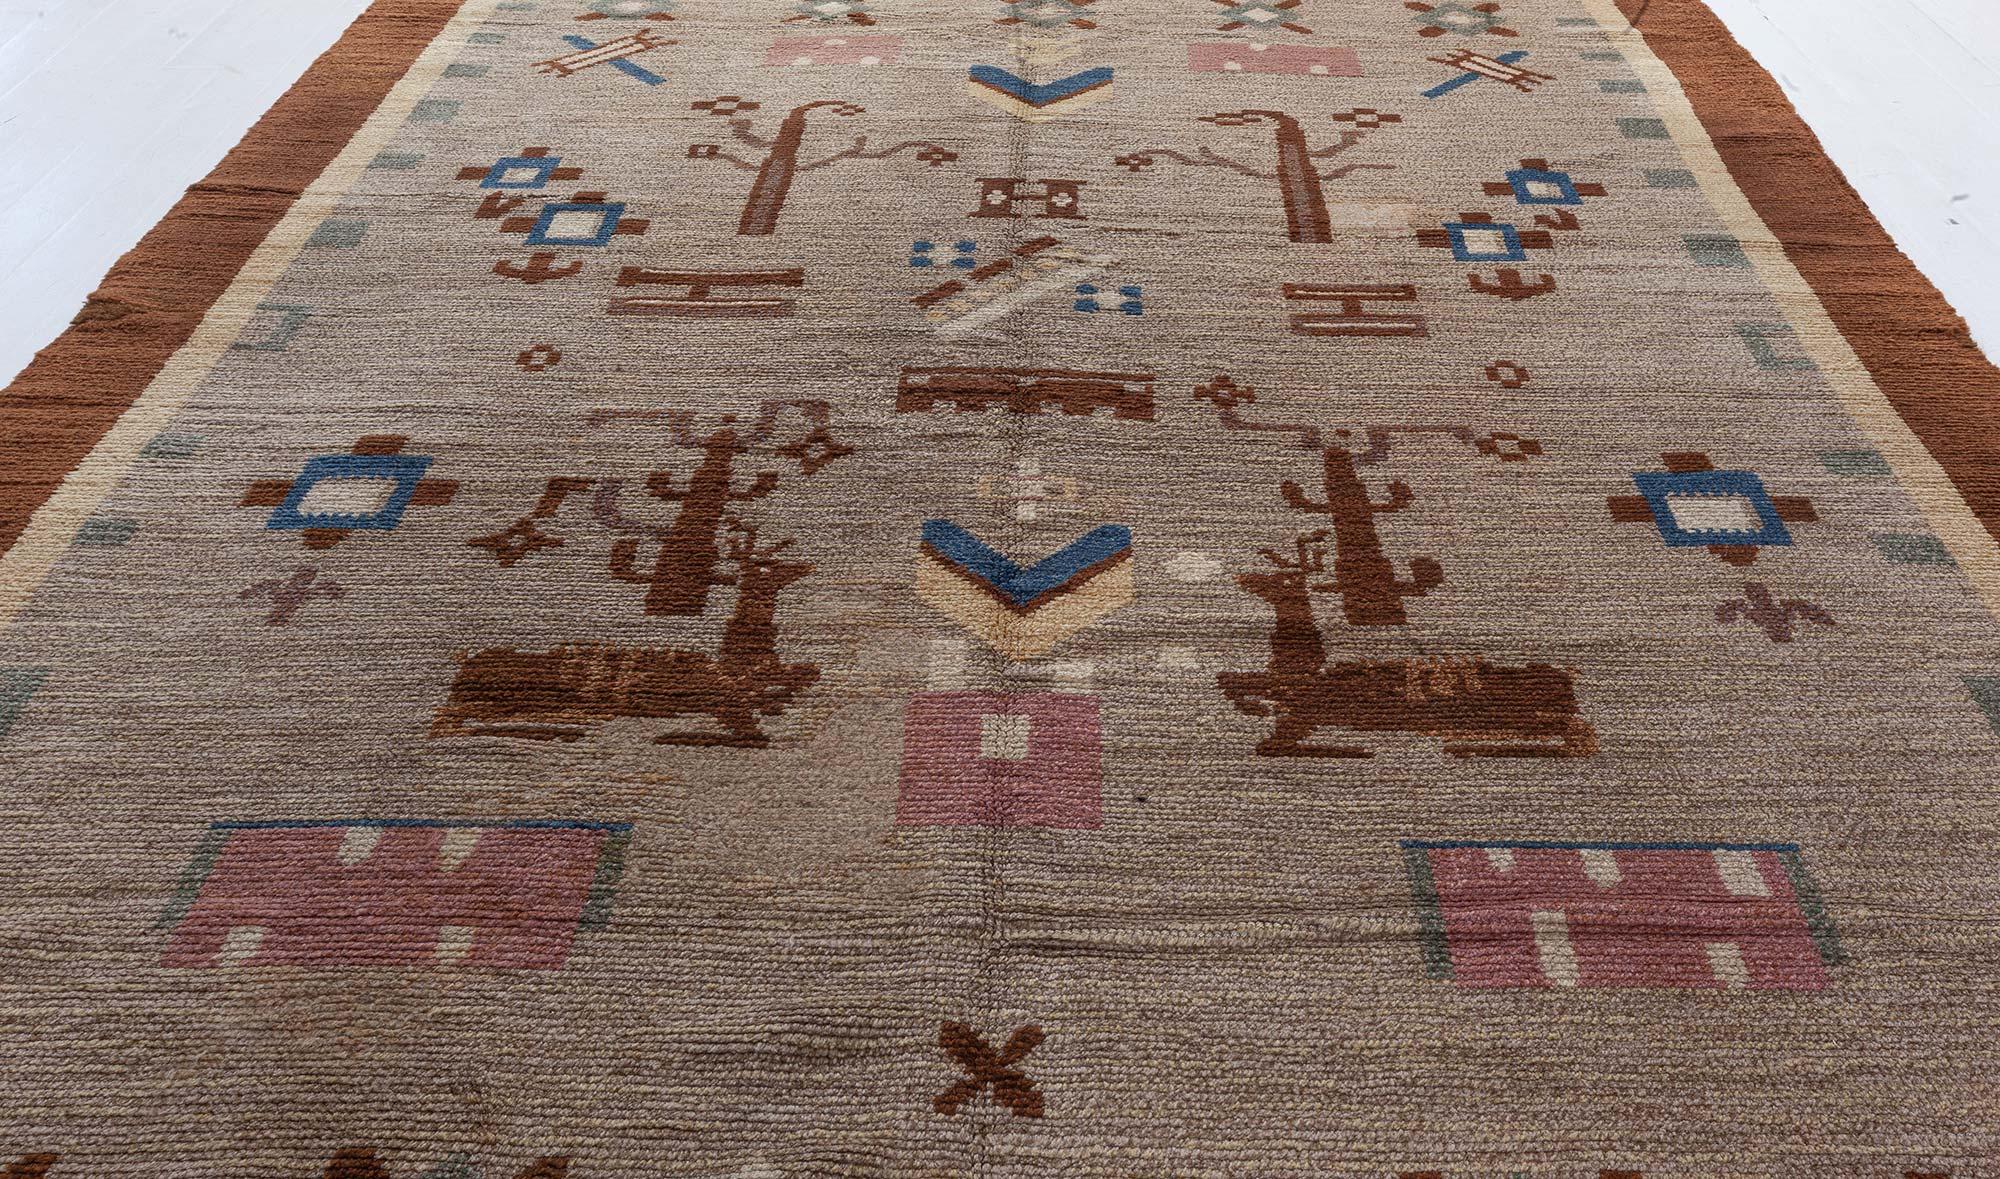 Hand-Painted Mid-20th Century Swedish Pile Rug Sign Initials 'HBB' For Sale